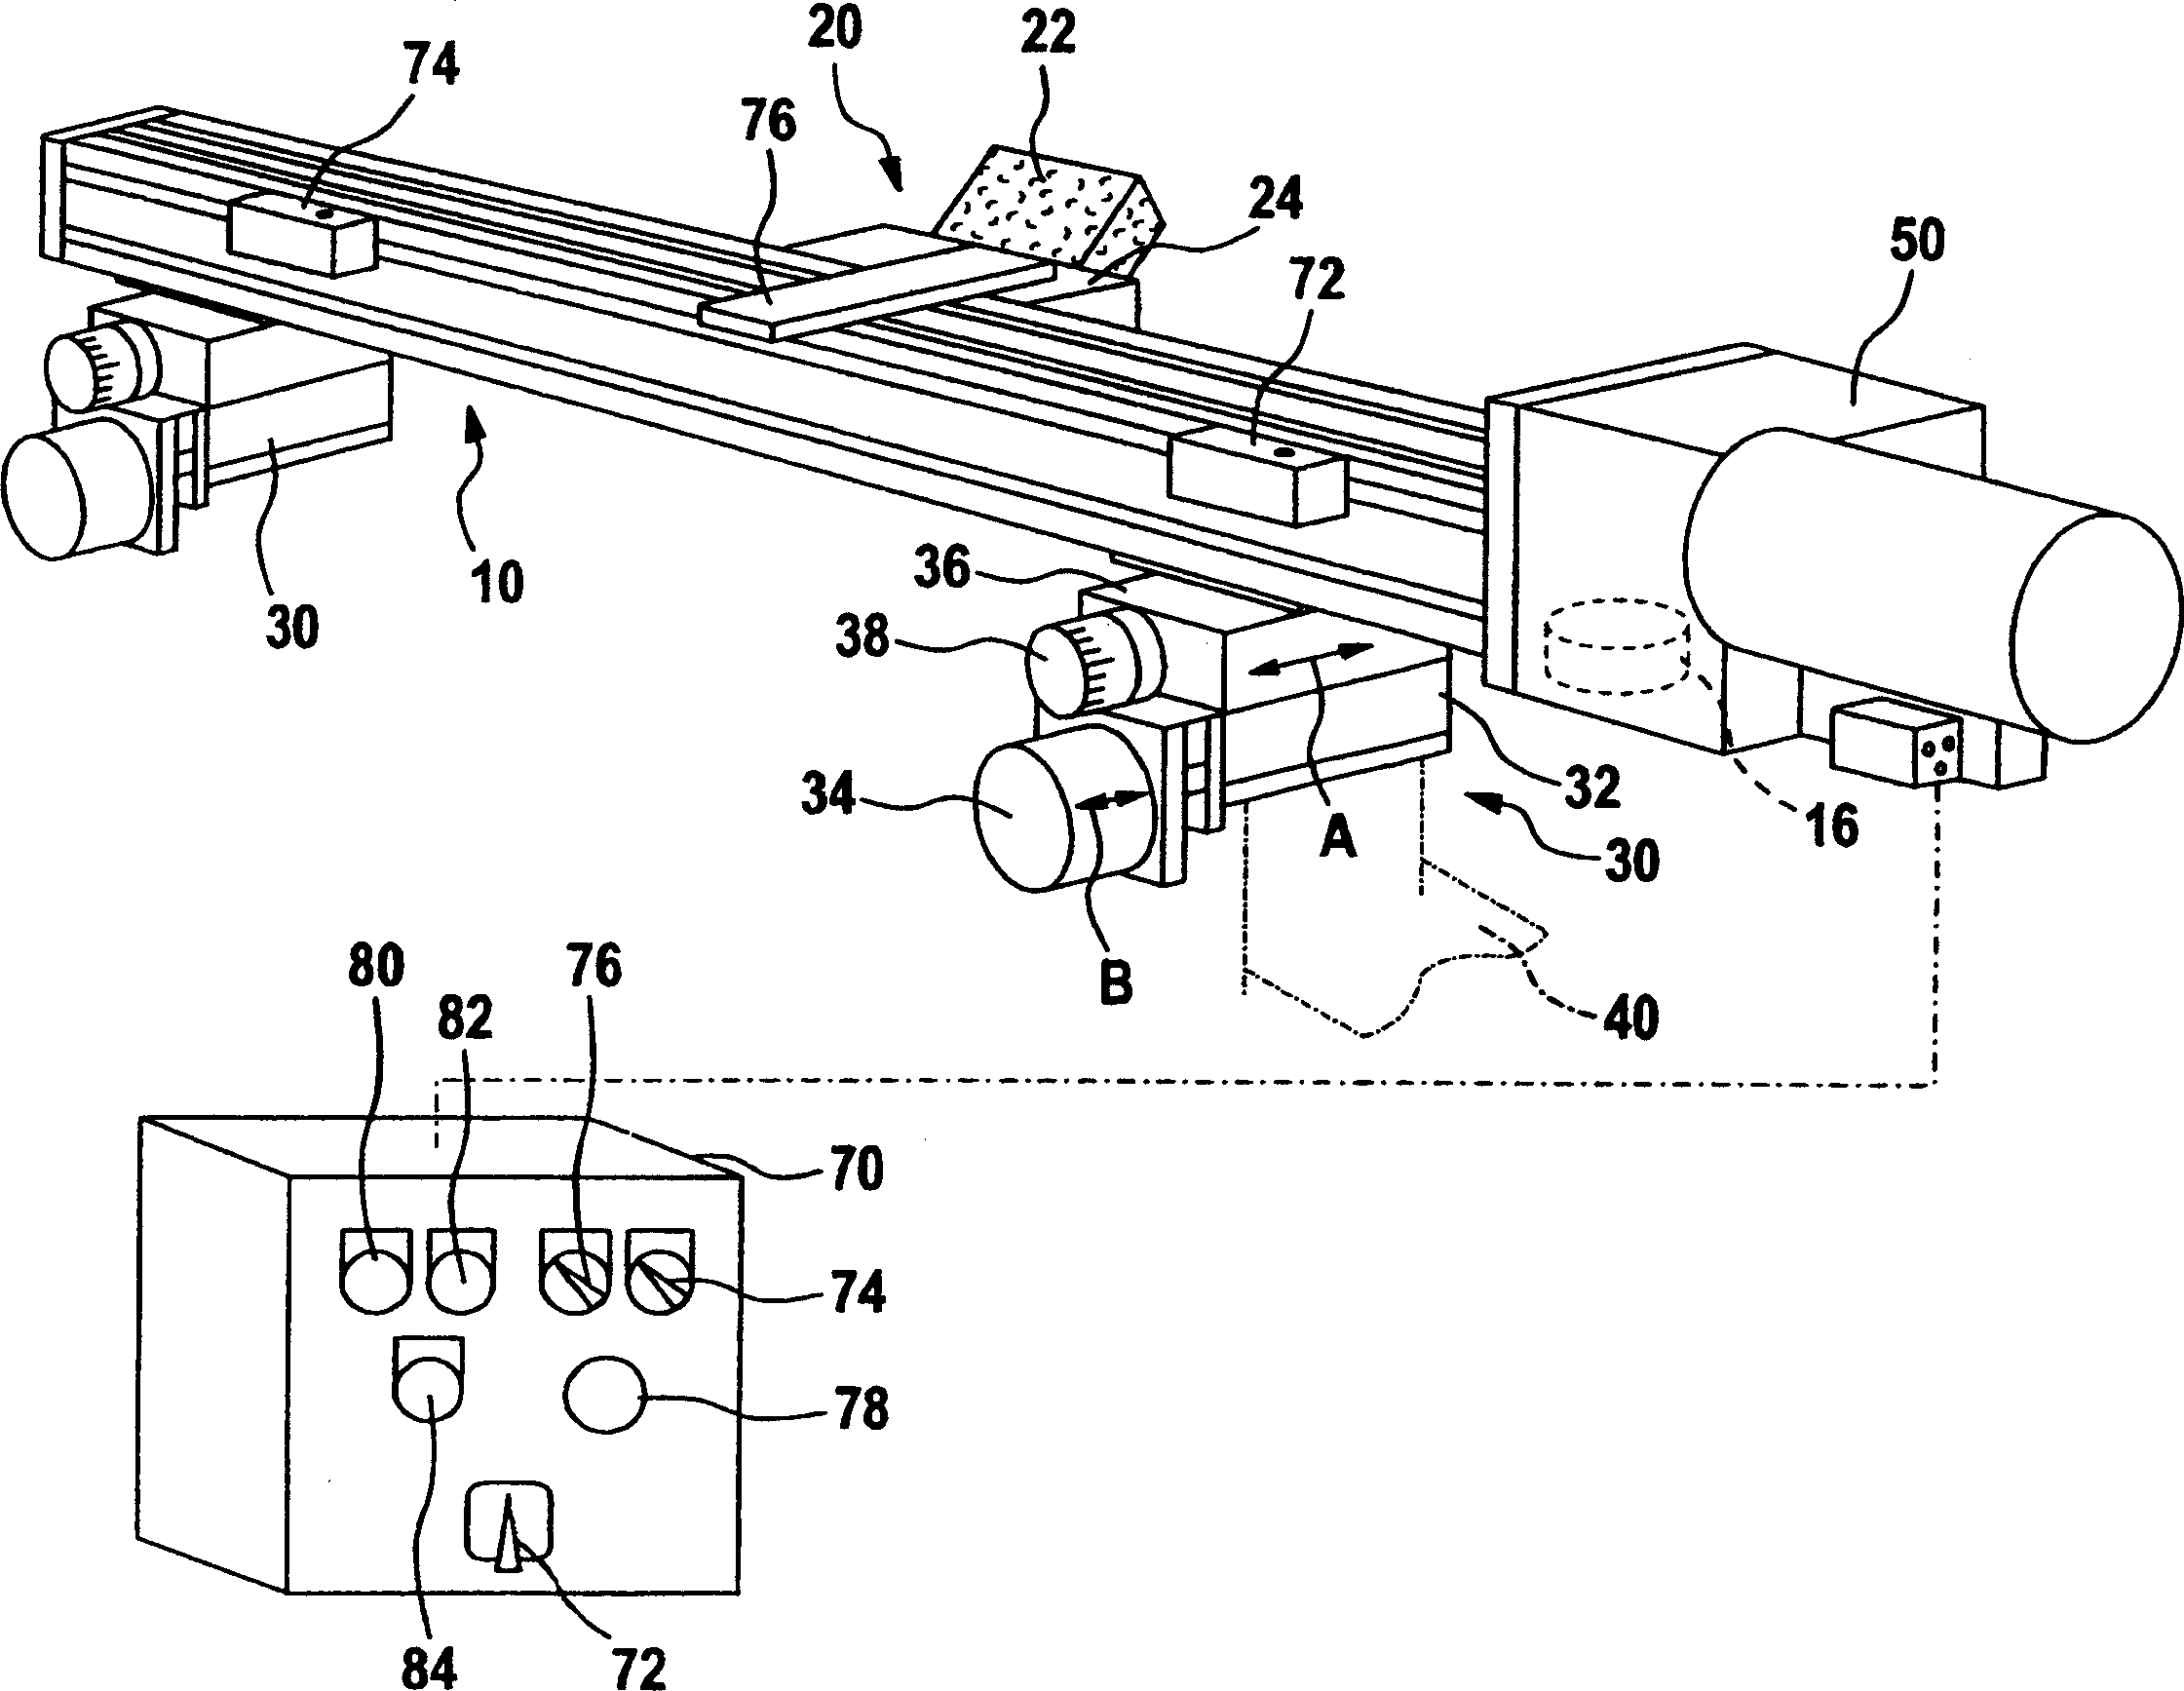 Apparatus and method for trimming card clothing